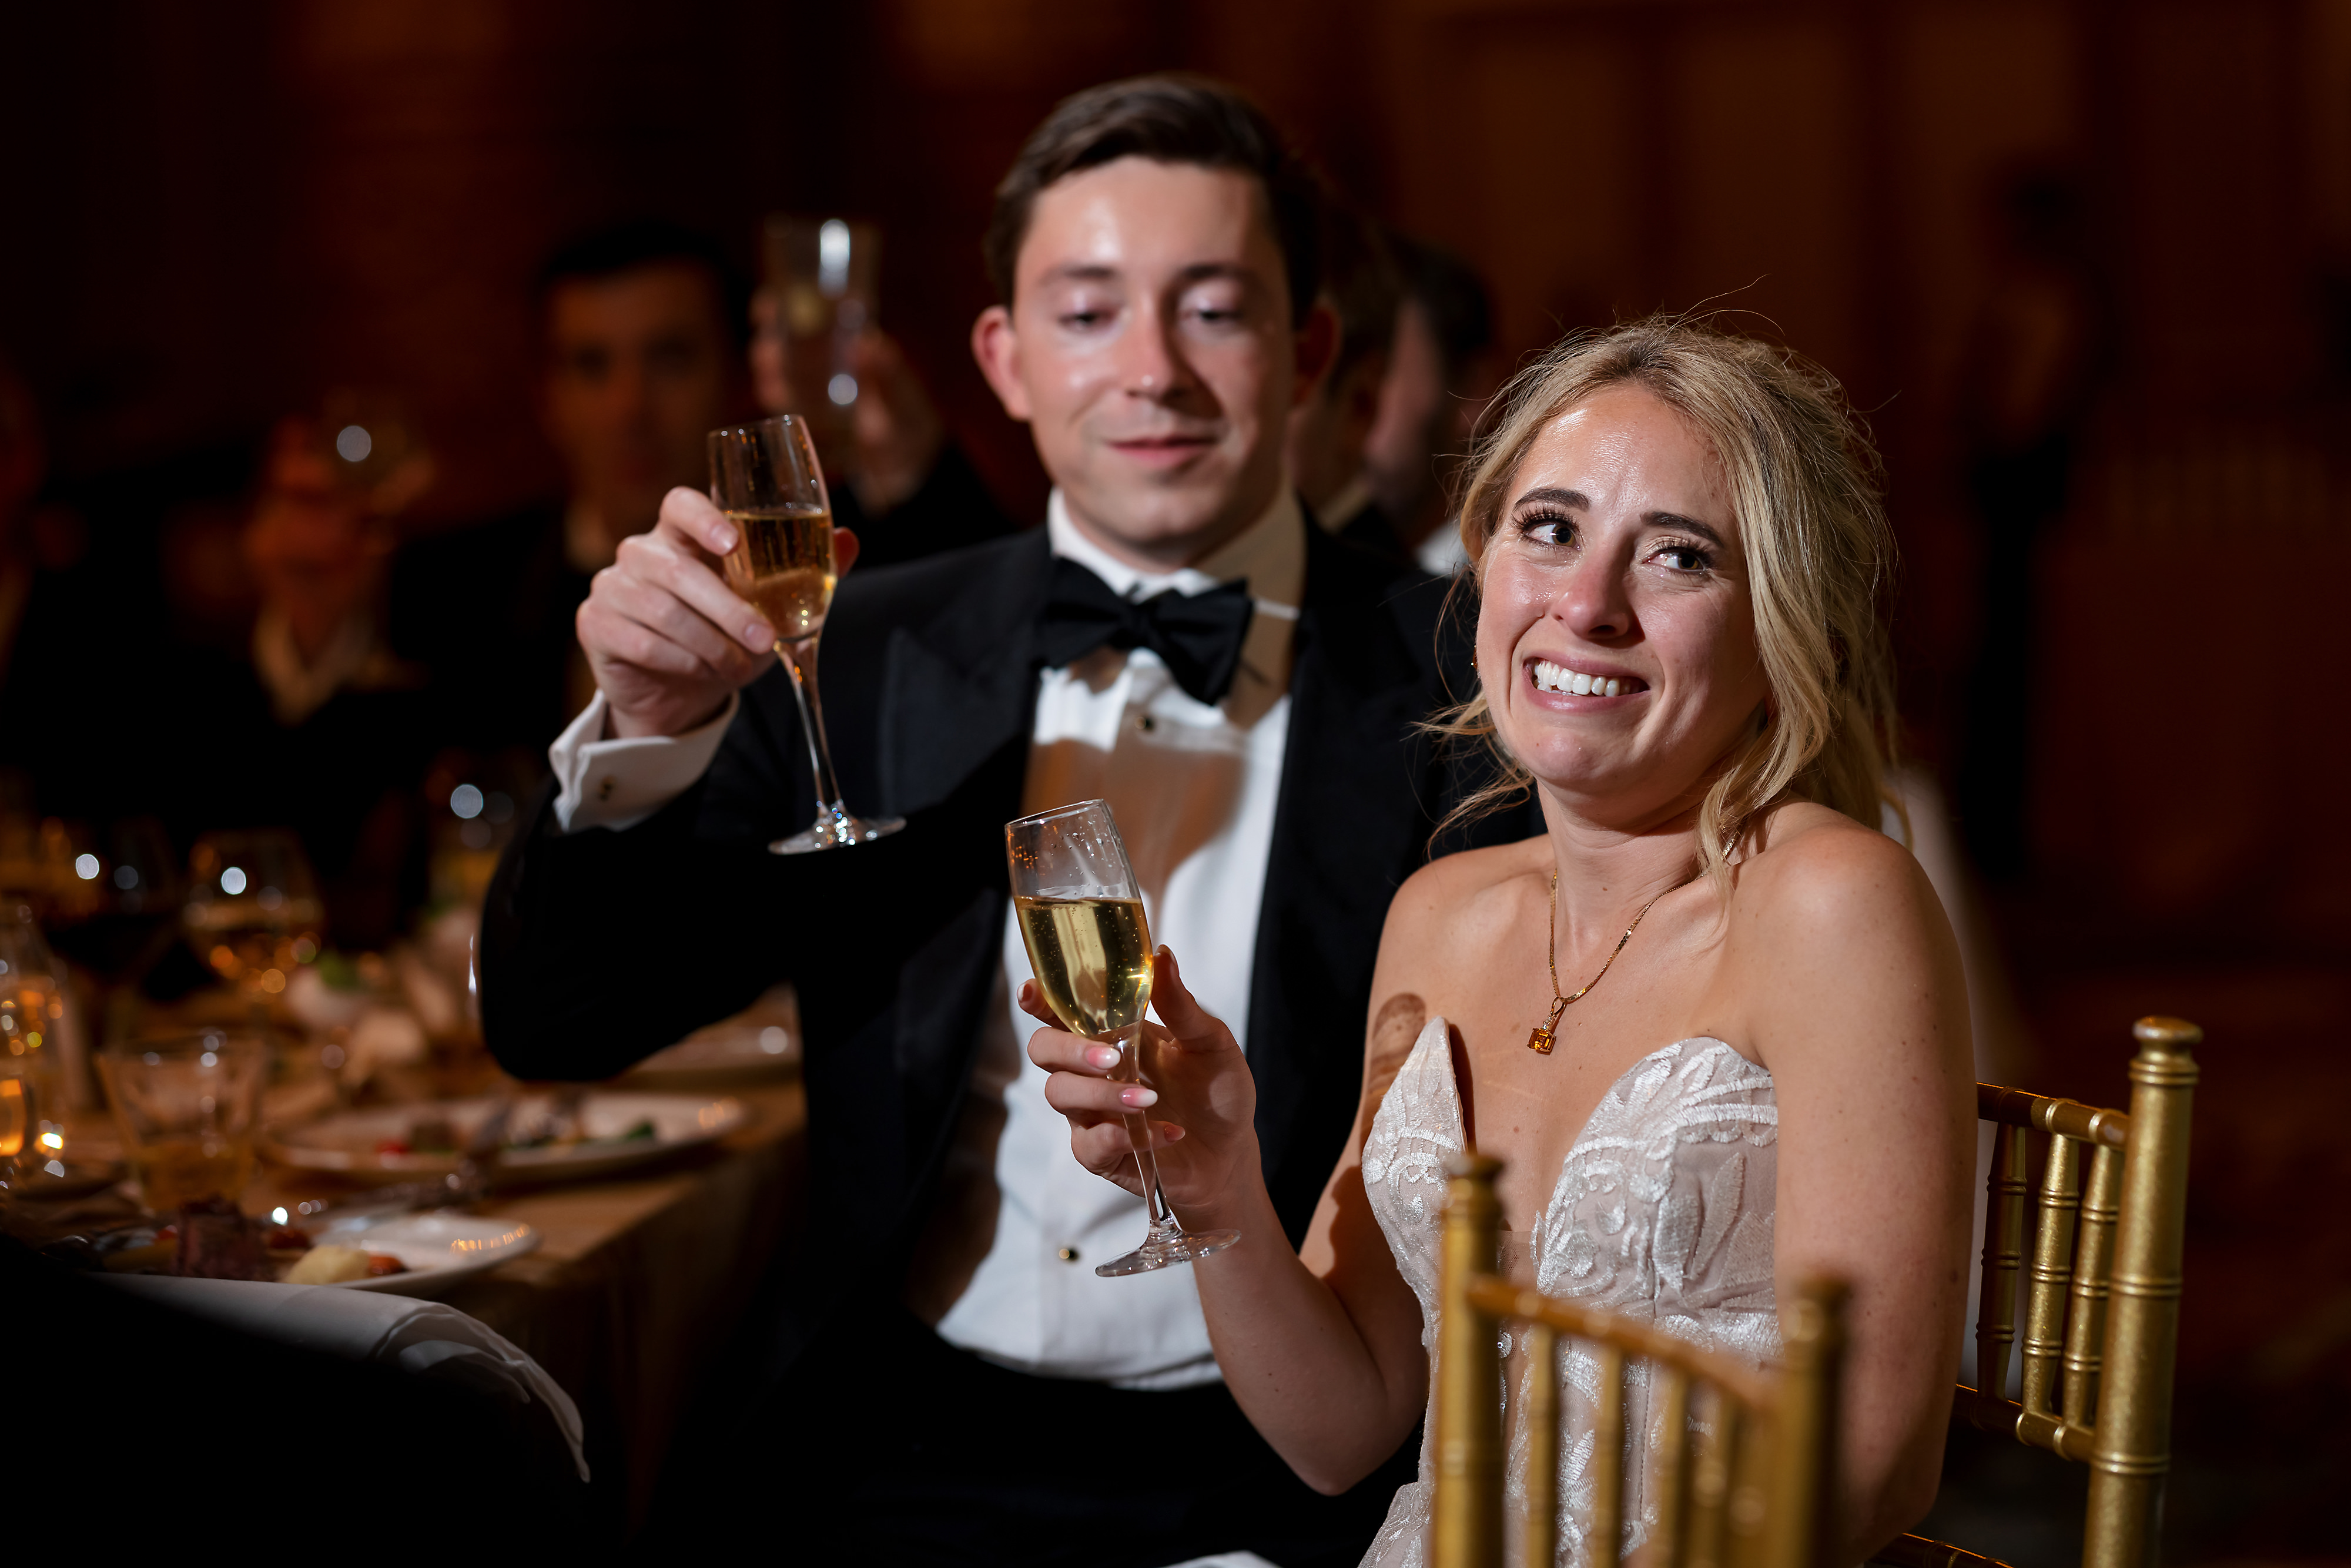 Bride and groom react to toast during wedding reception in the Grand Ballroom at The Drake Hotel in Chicago